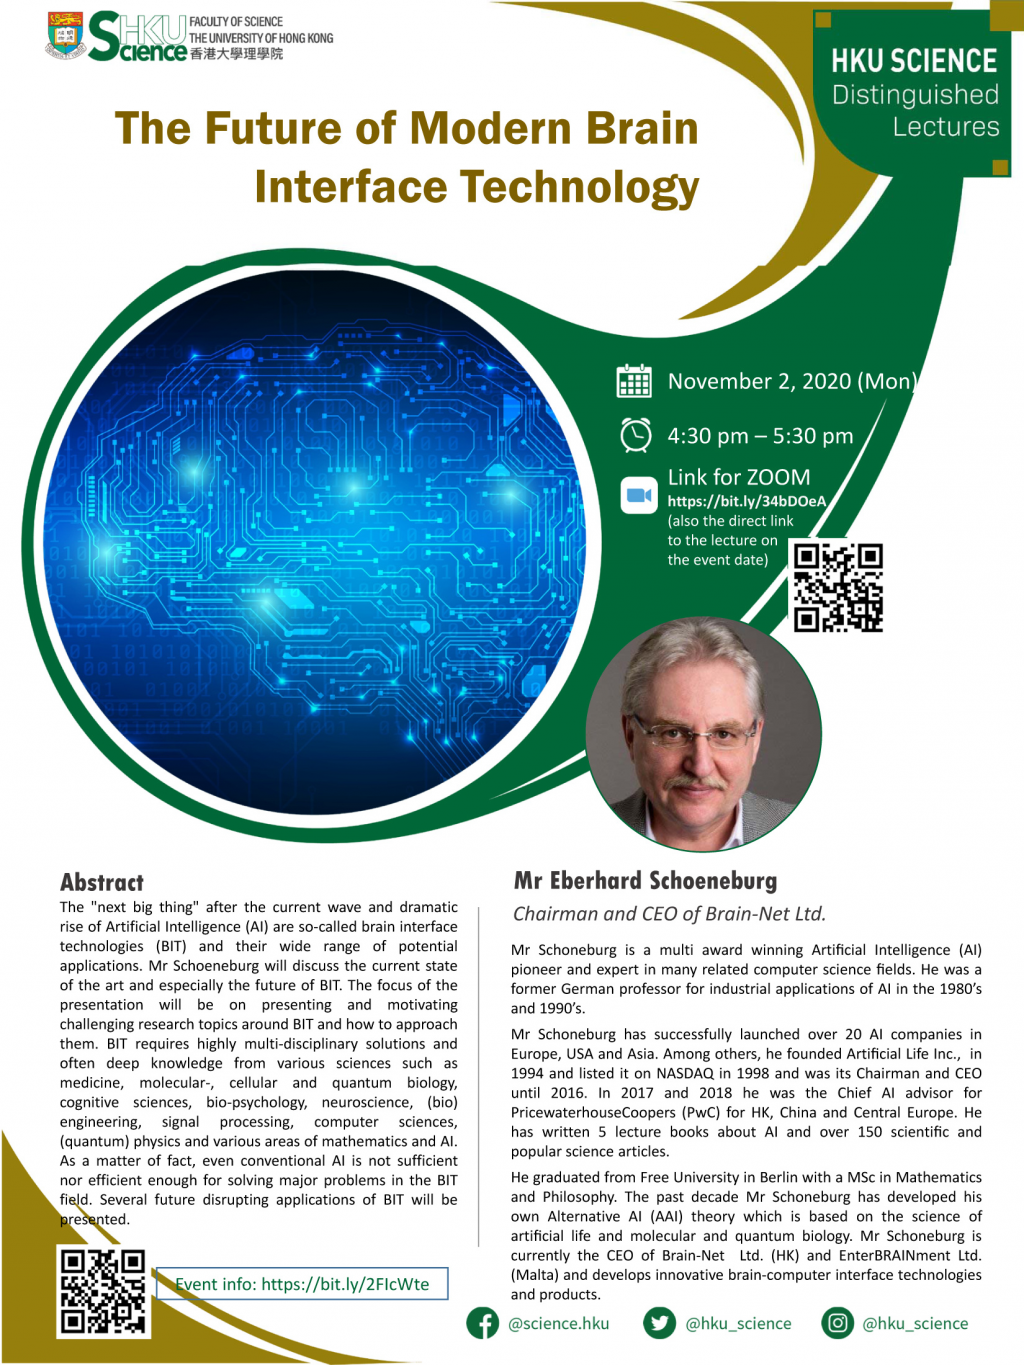 HKU Science Distinguished Lecture Series - The Future of Modern Brain Interface Technology